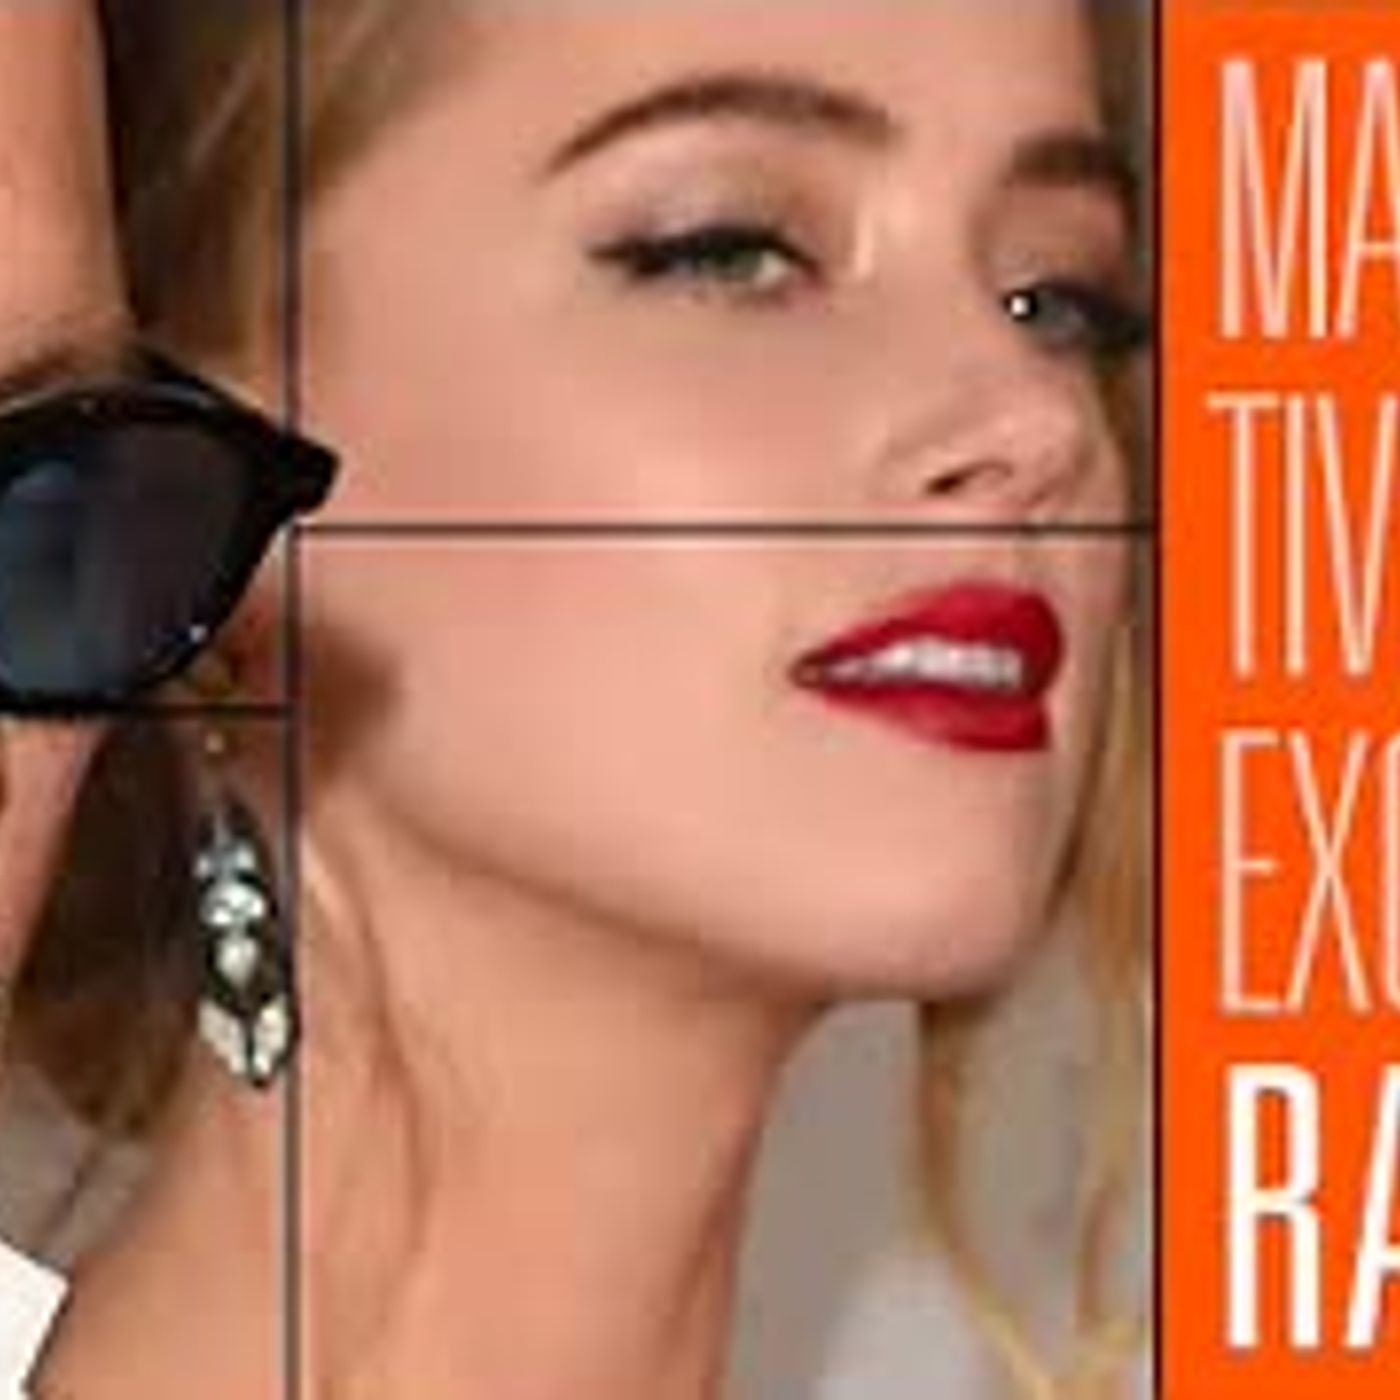 This is how the 'manipulative victim' excuse shaped Depp vs Heard media coverage | Rantzerker 160